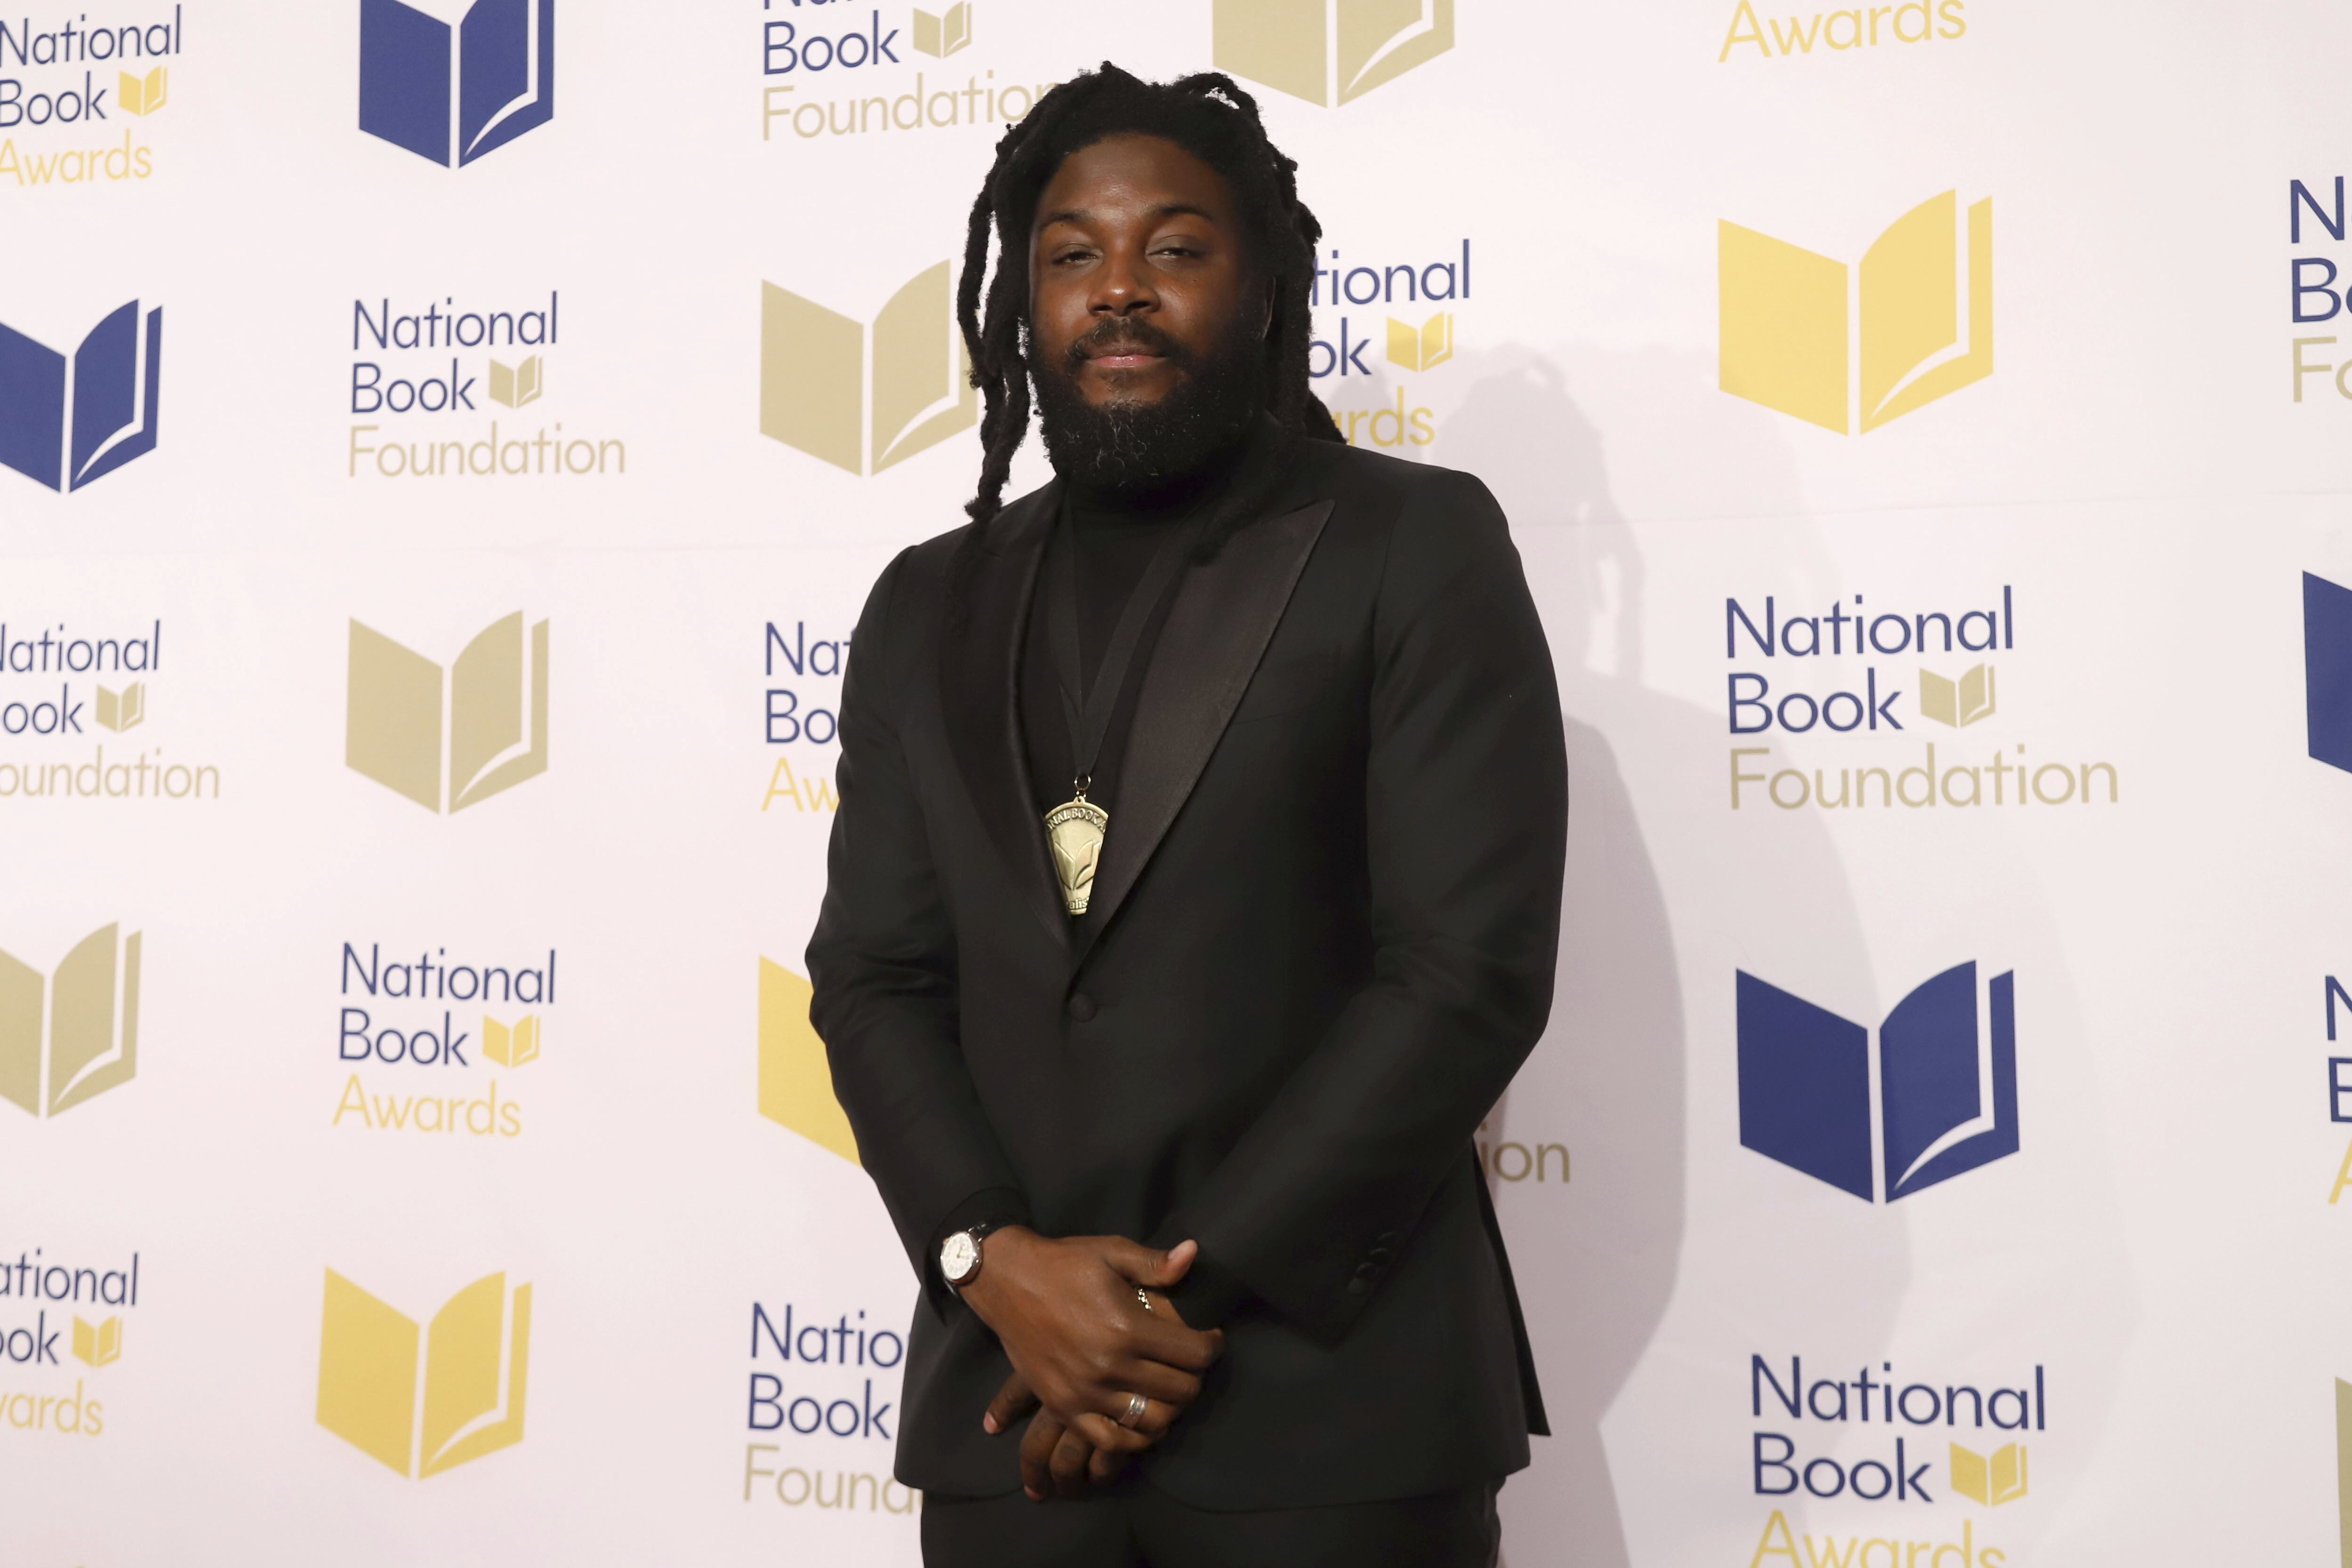 Jason Reynolds, Author, Poet, Activist, Body Biography Project - Study All  Knight